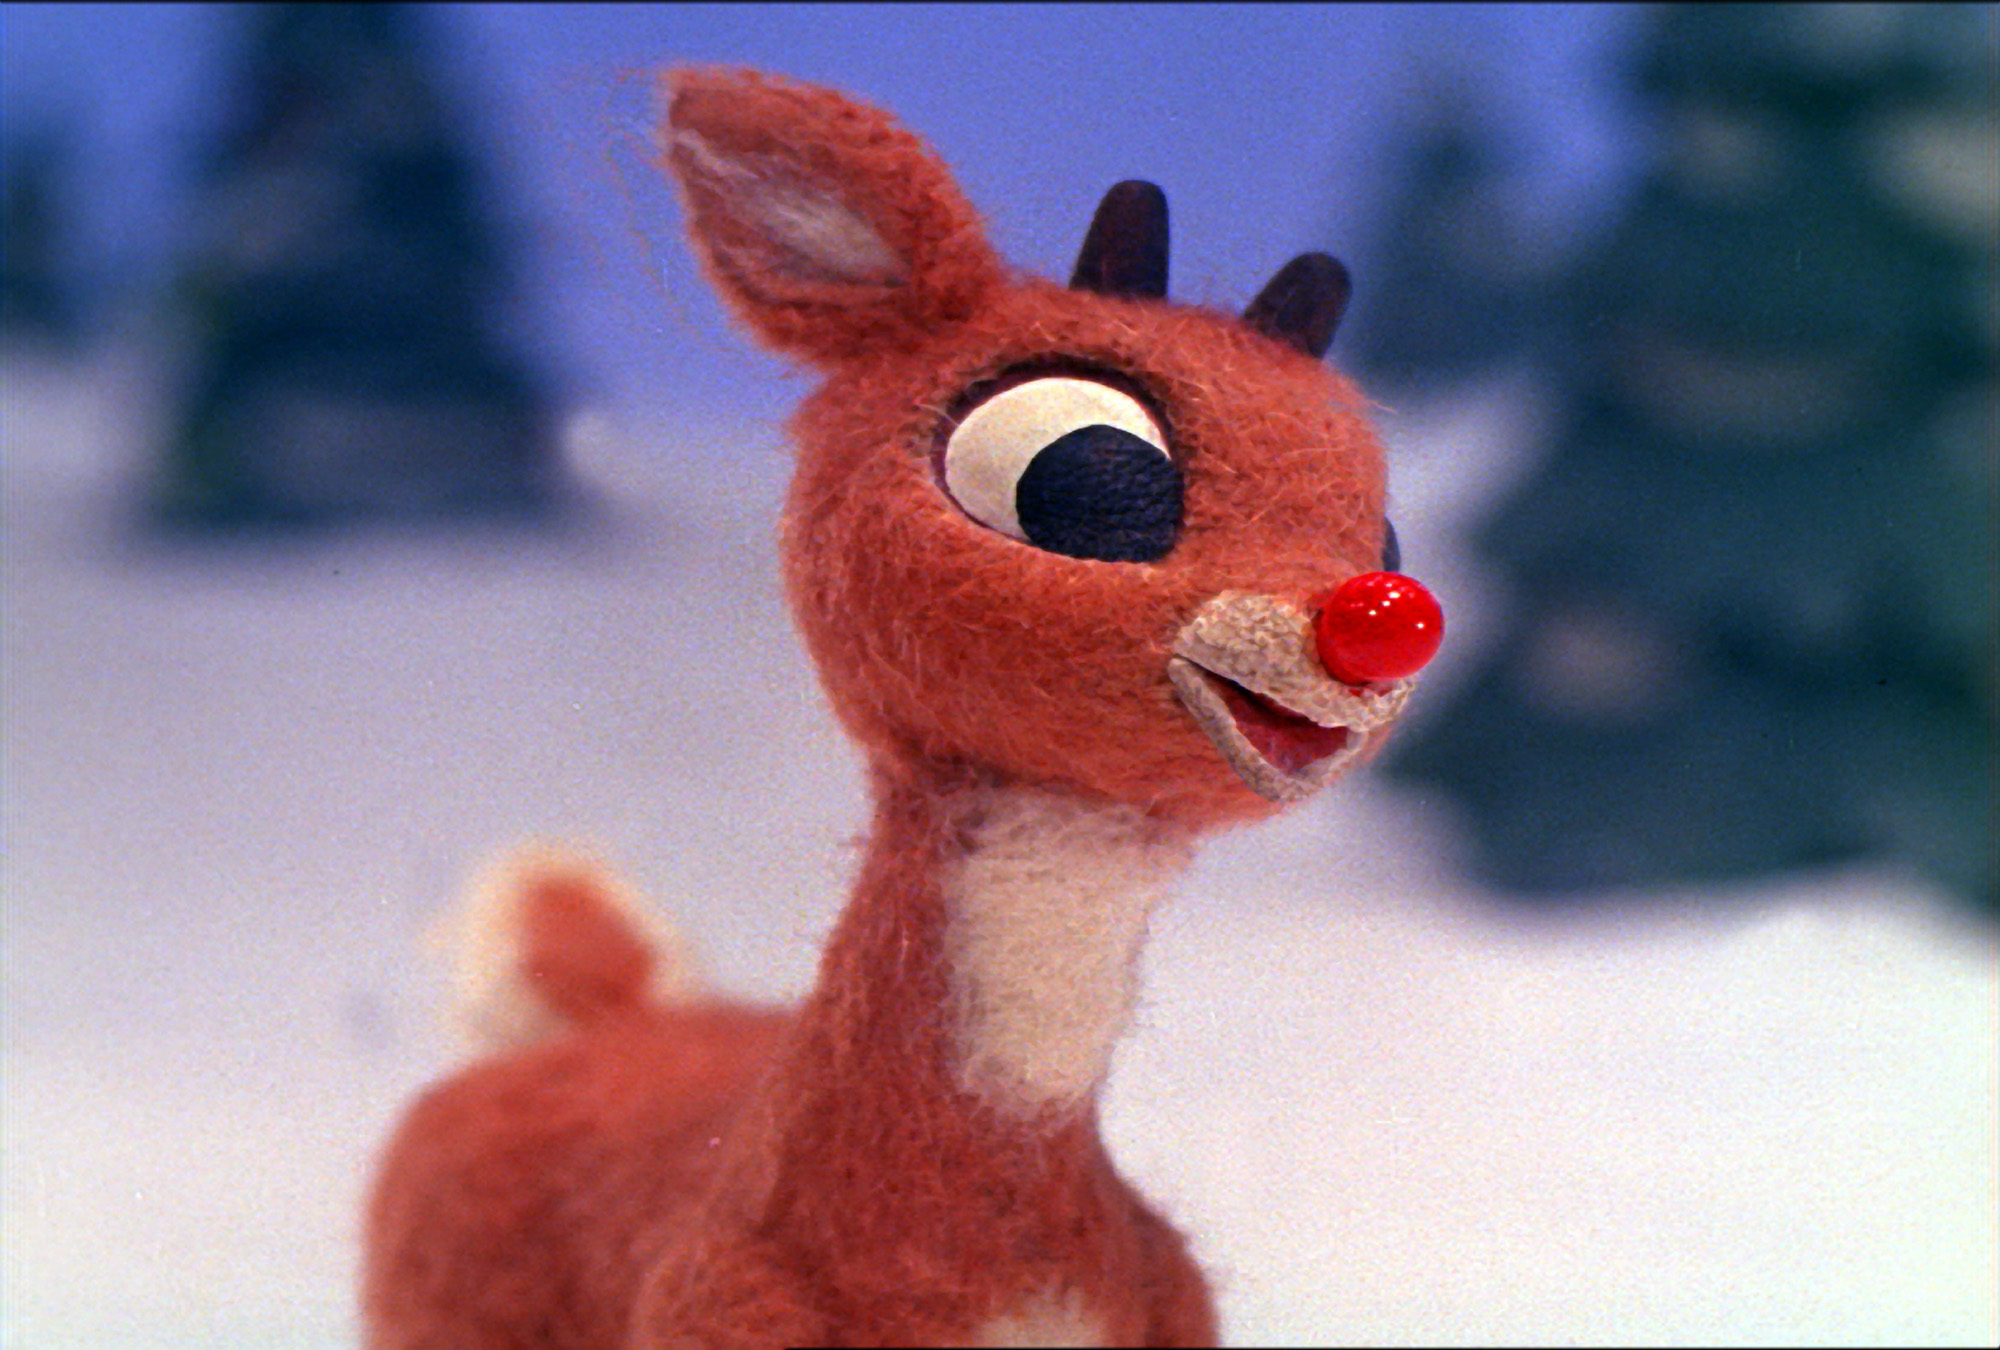 ‘Rudolph the RedNosed Reindeer’ reconsidered, deconstructed The